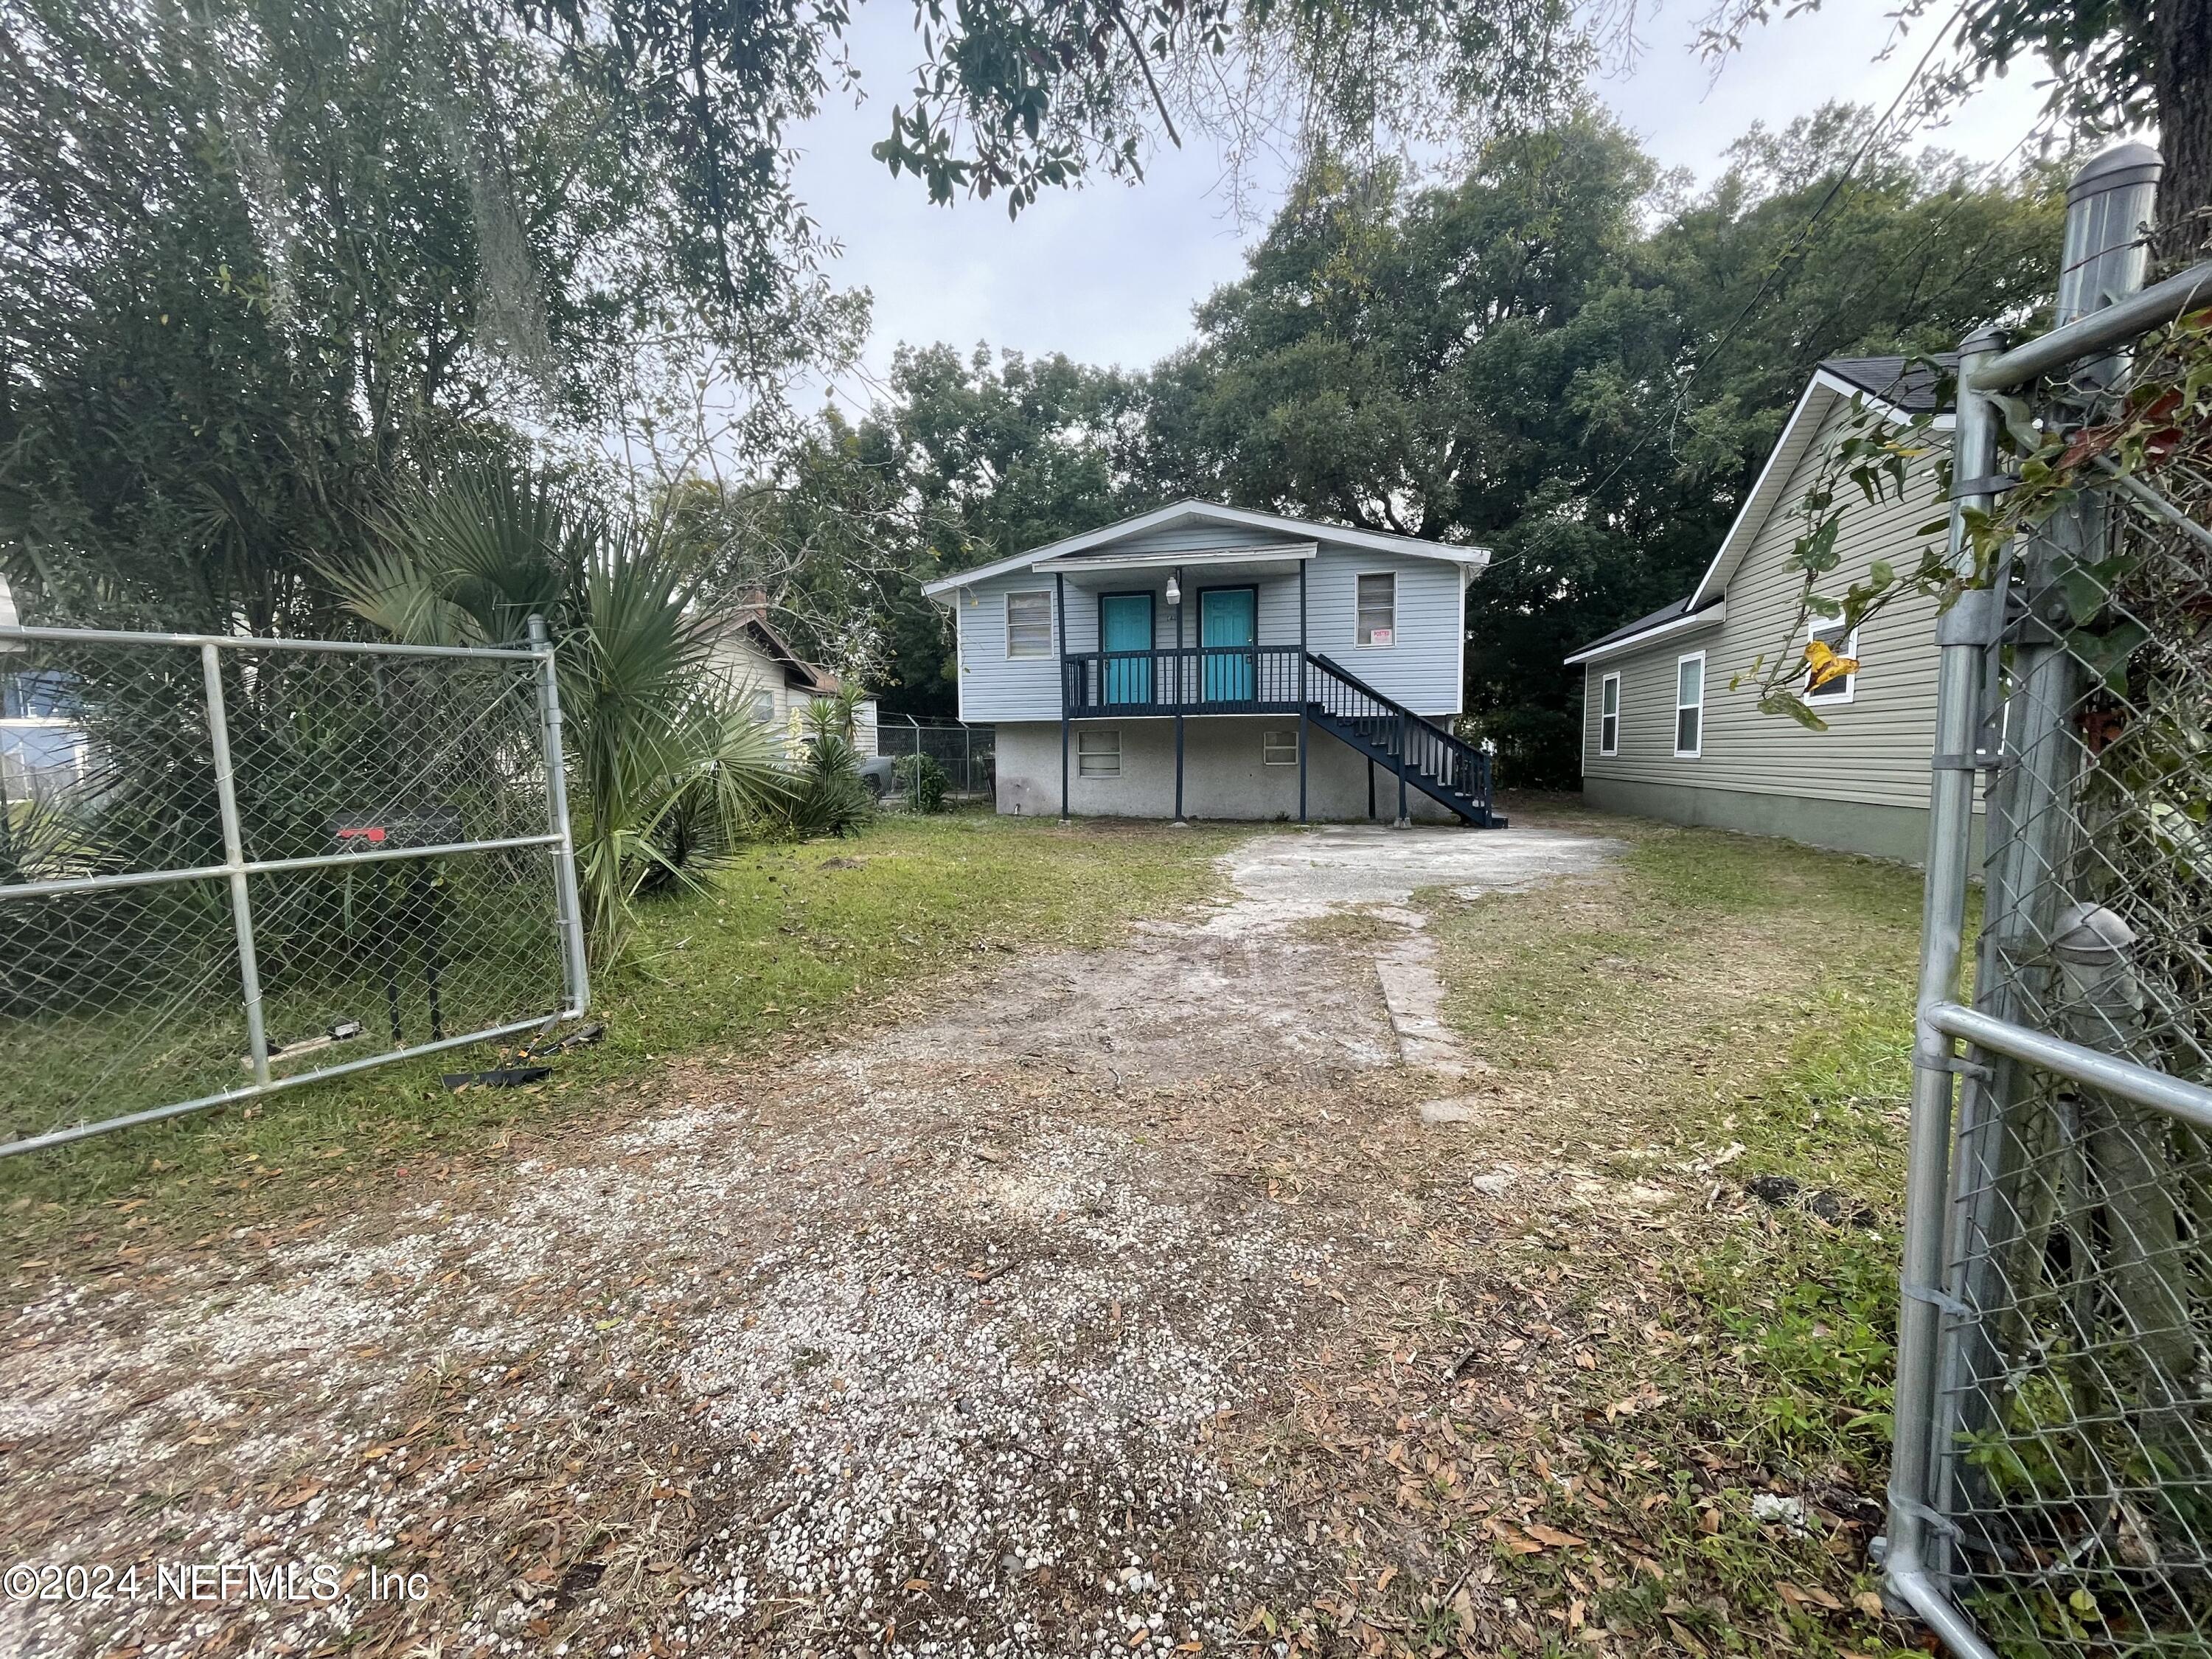 Jacksonville, FL home for sale located at 1440 W 2ND Street, Jacksonville, FL 32209